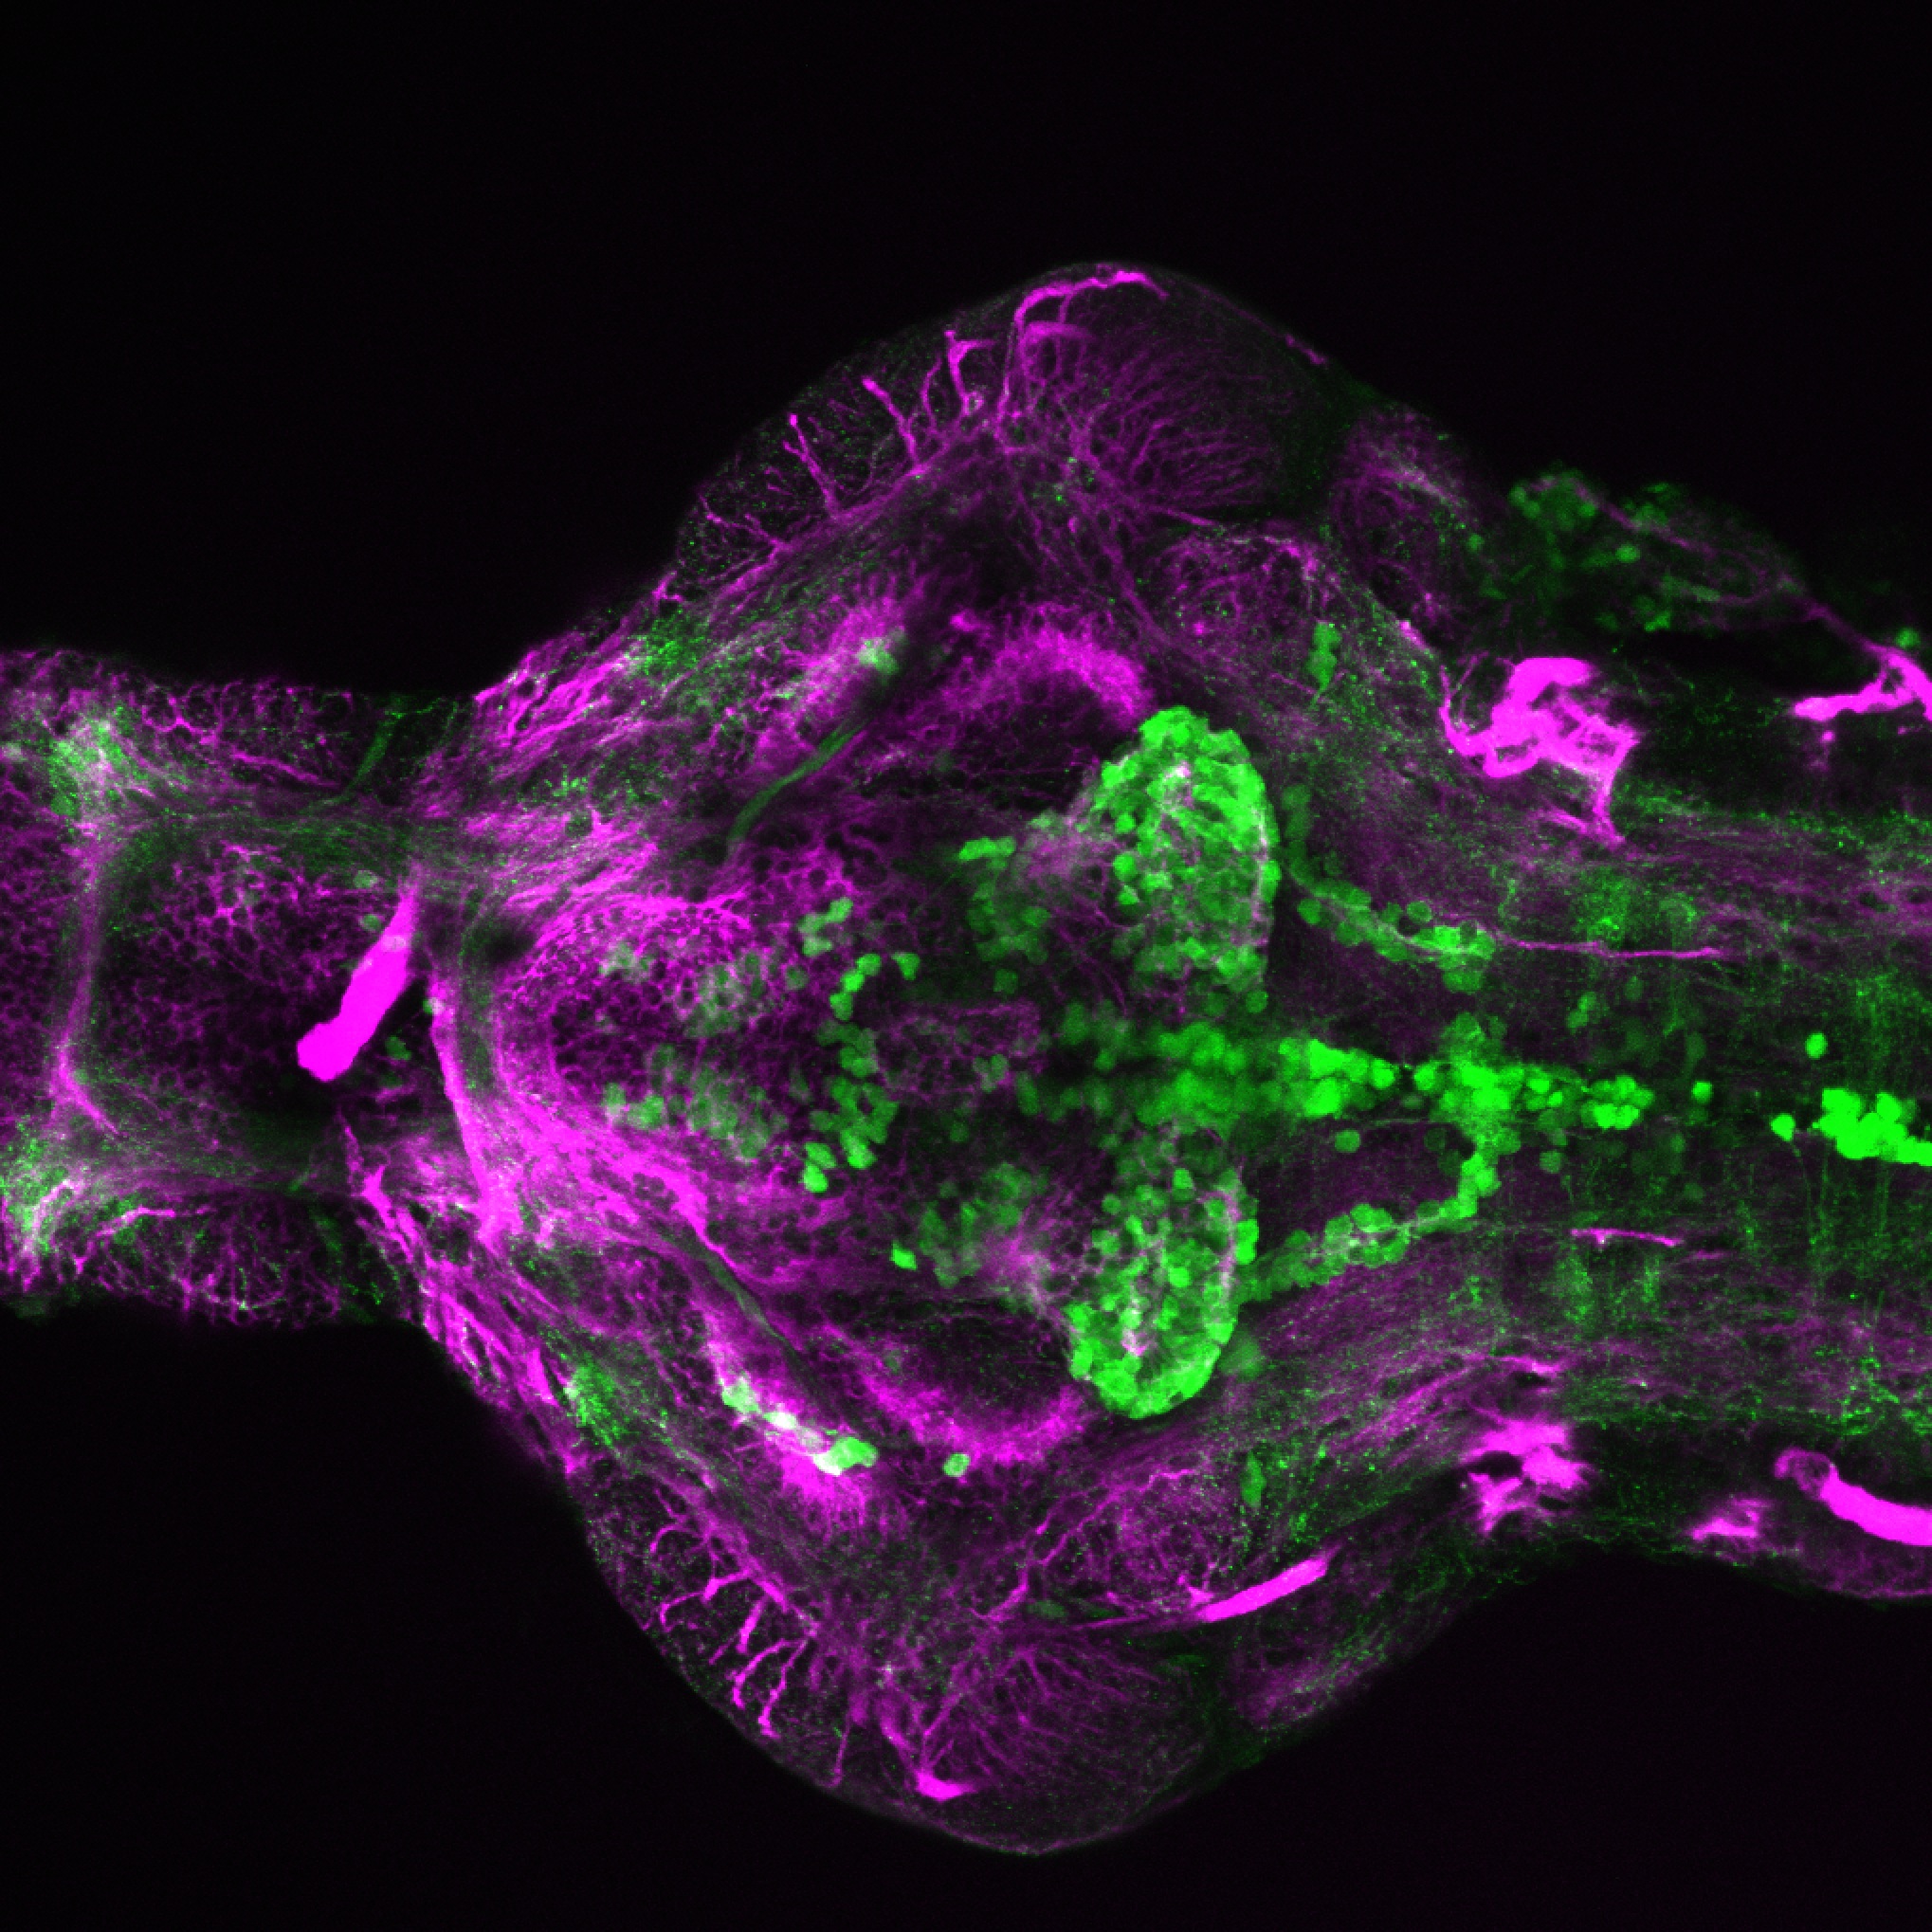 4dpf Ventral view of ETvmat2:GFP with acetylated tubulin(magenta).. 